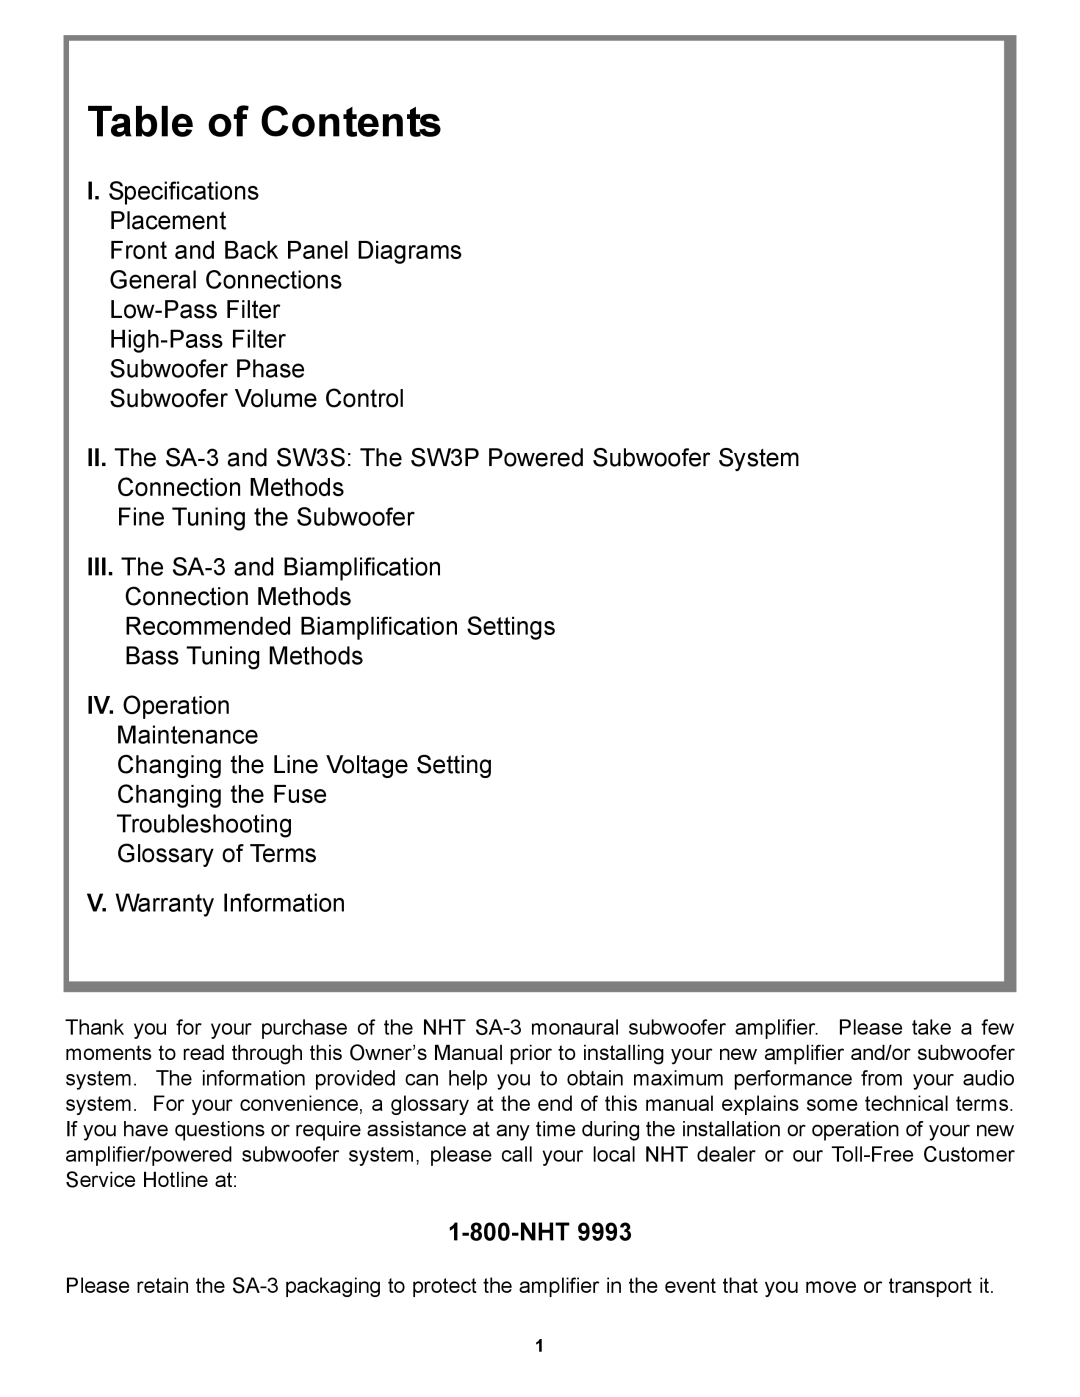 NHT SA-3 owner manual Table of Contents, 1-800-NHT 